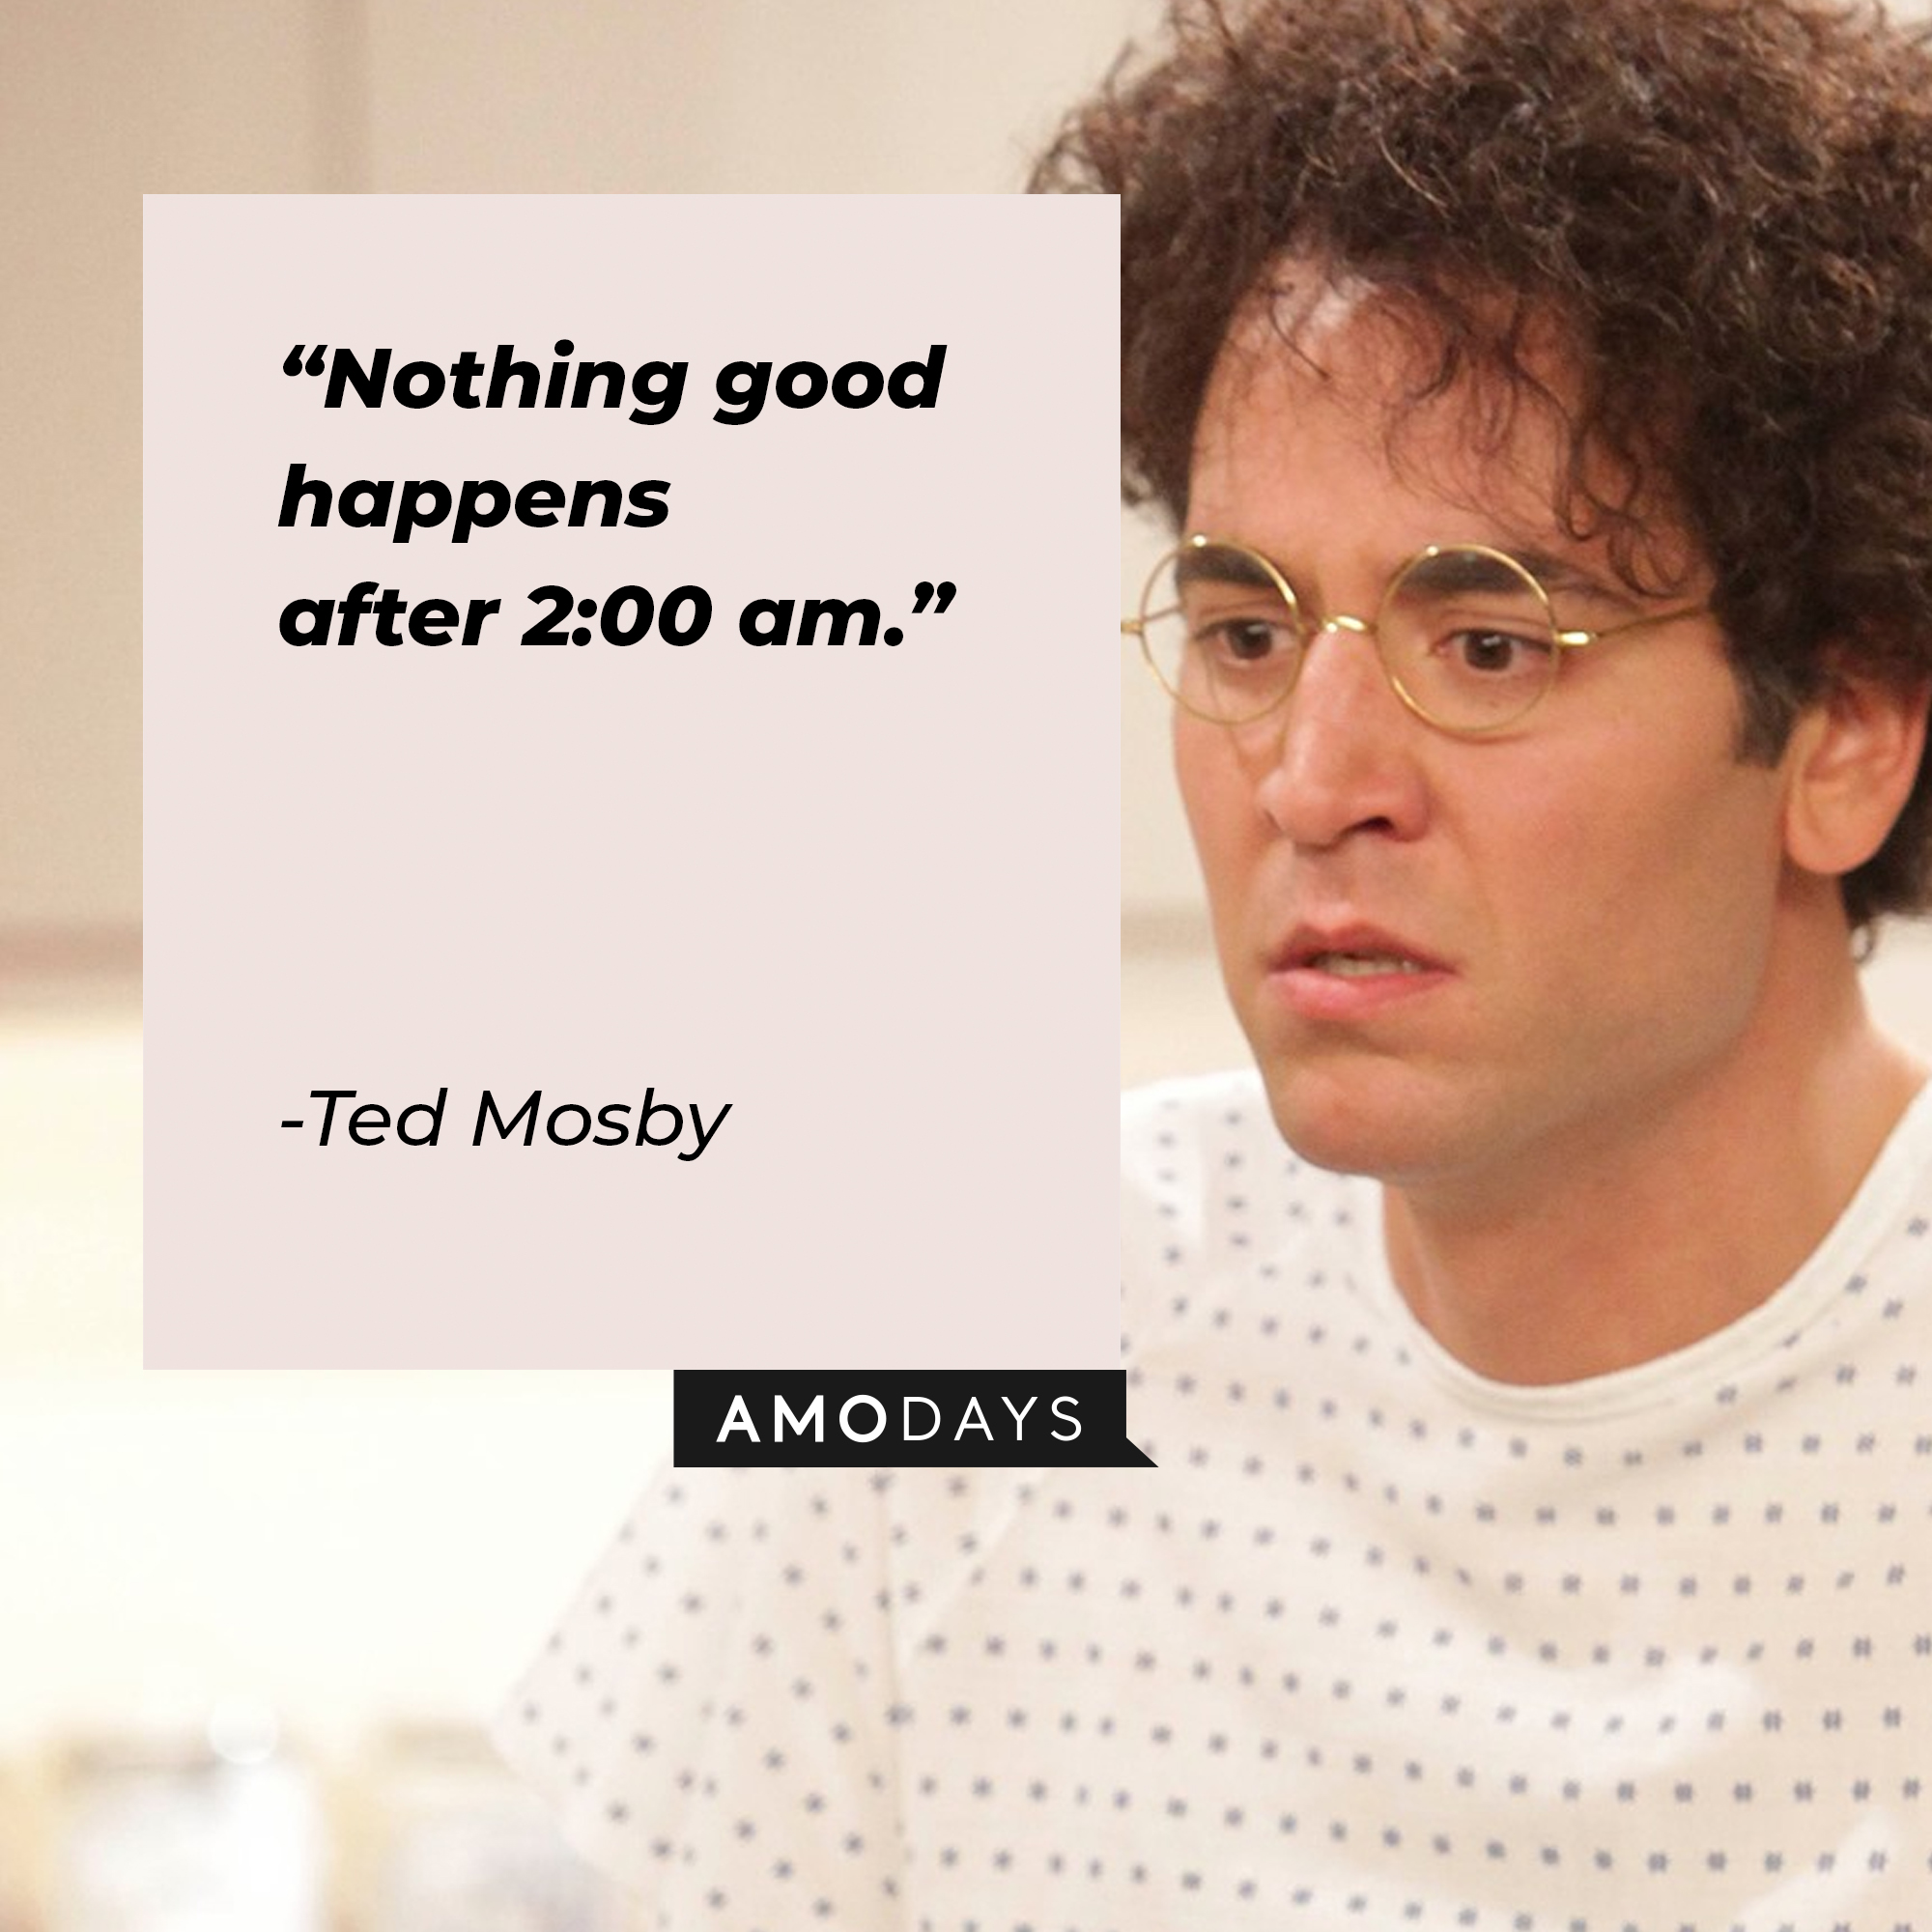 A picture of Ted Mosby with his quote, “Nothing good happens after 2:00 am.”| Source: facebook.com/OfficialHowIMetYourMother